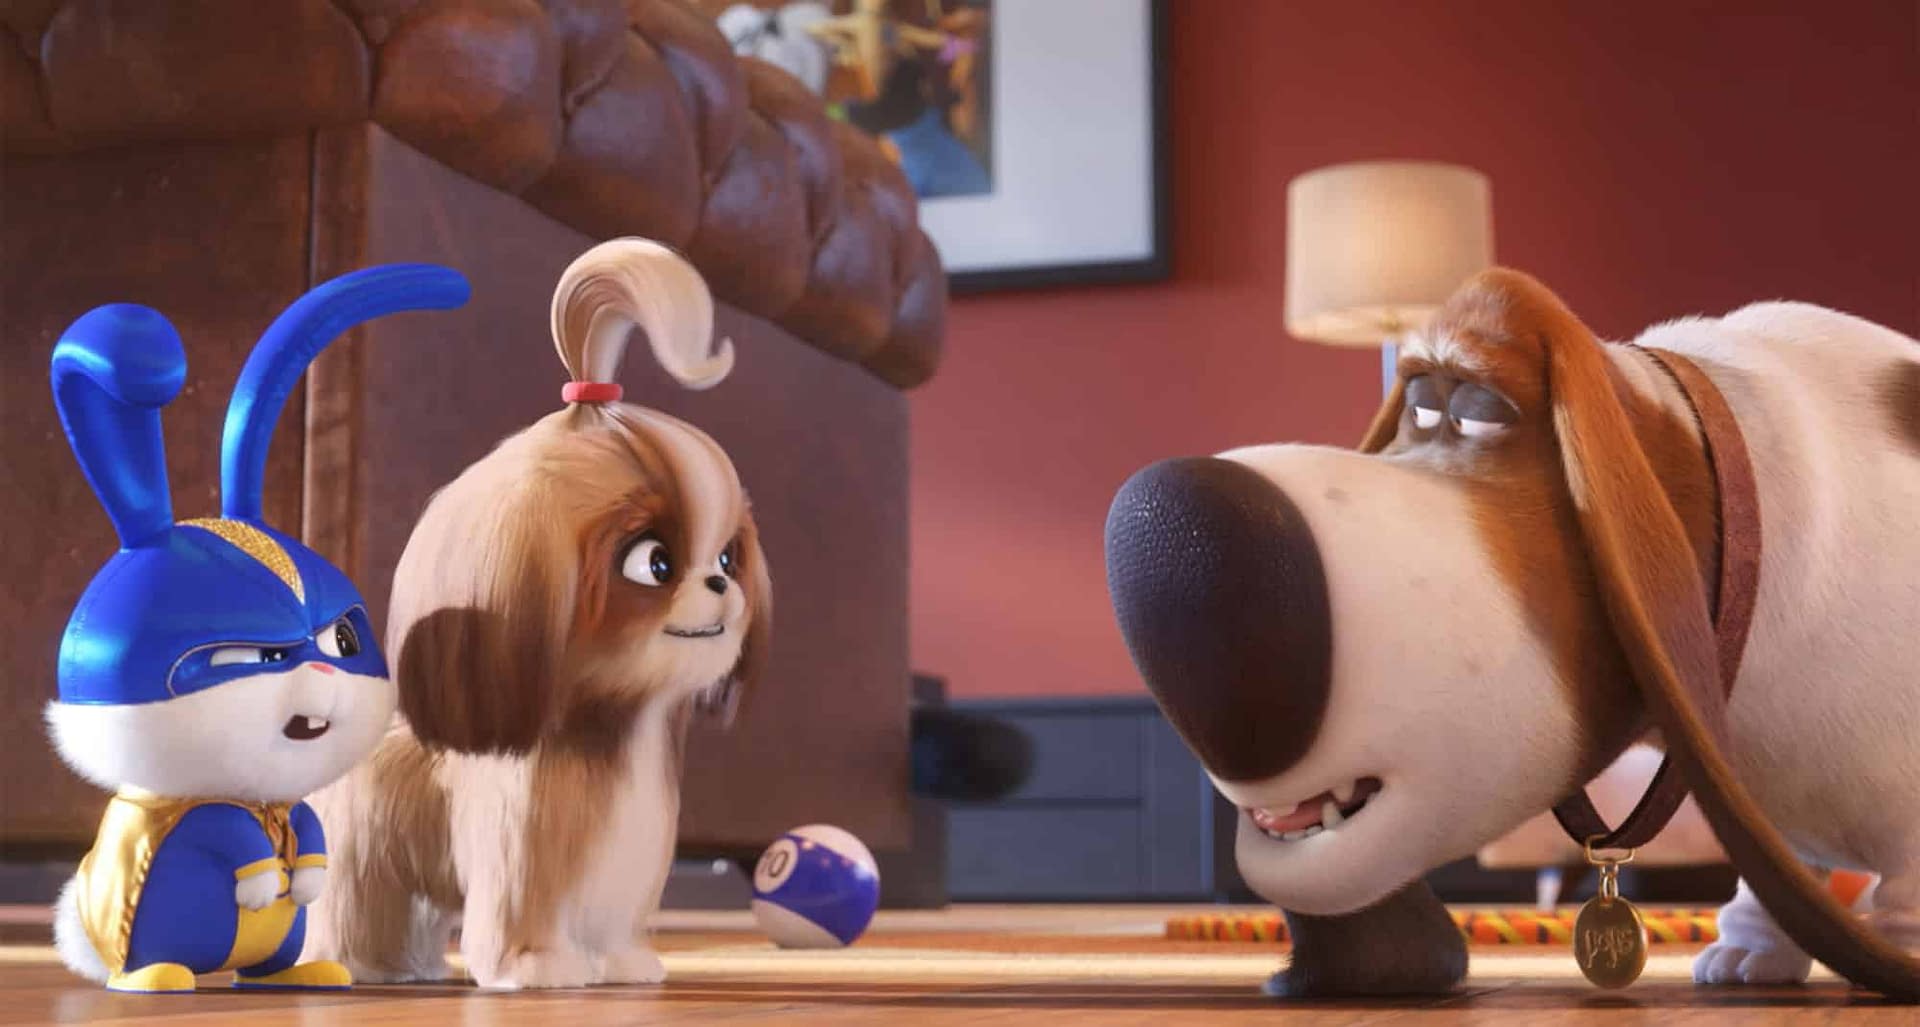 Universal Releases Another New Character Trailer and Poster for The Secret Life of Pets 2